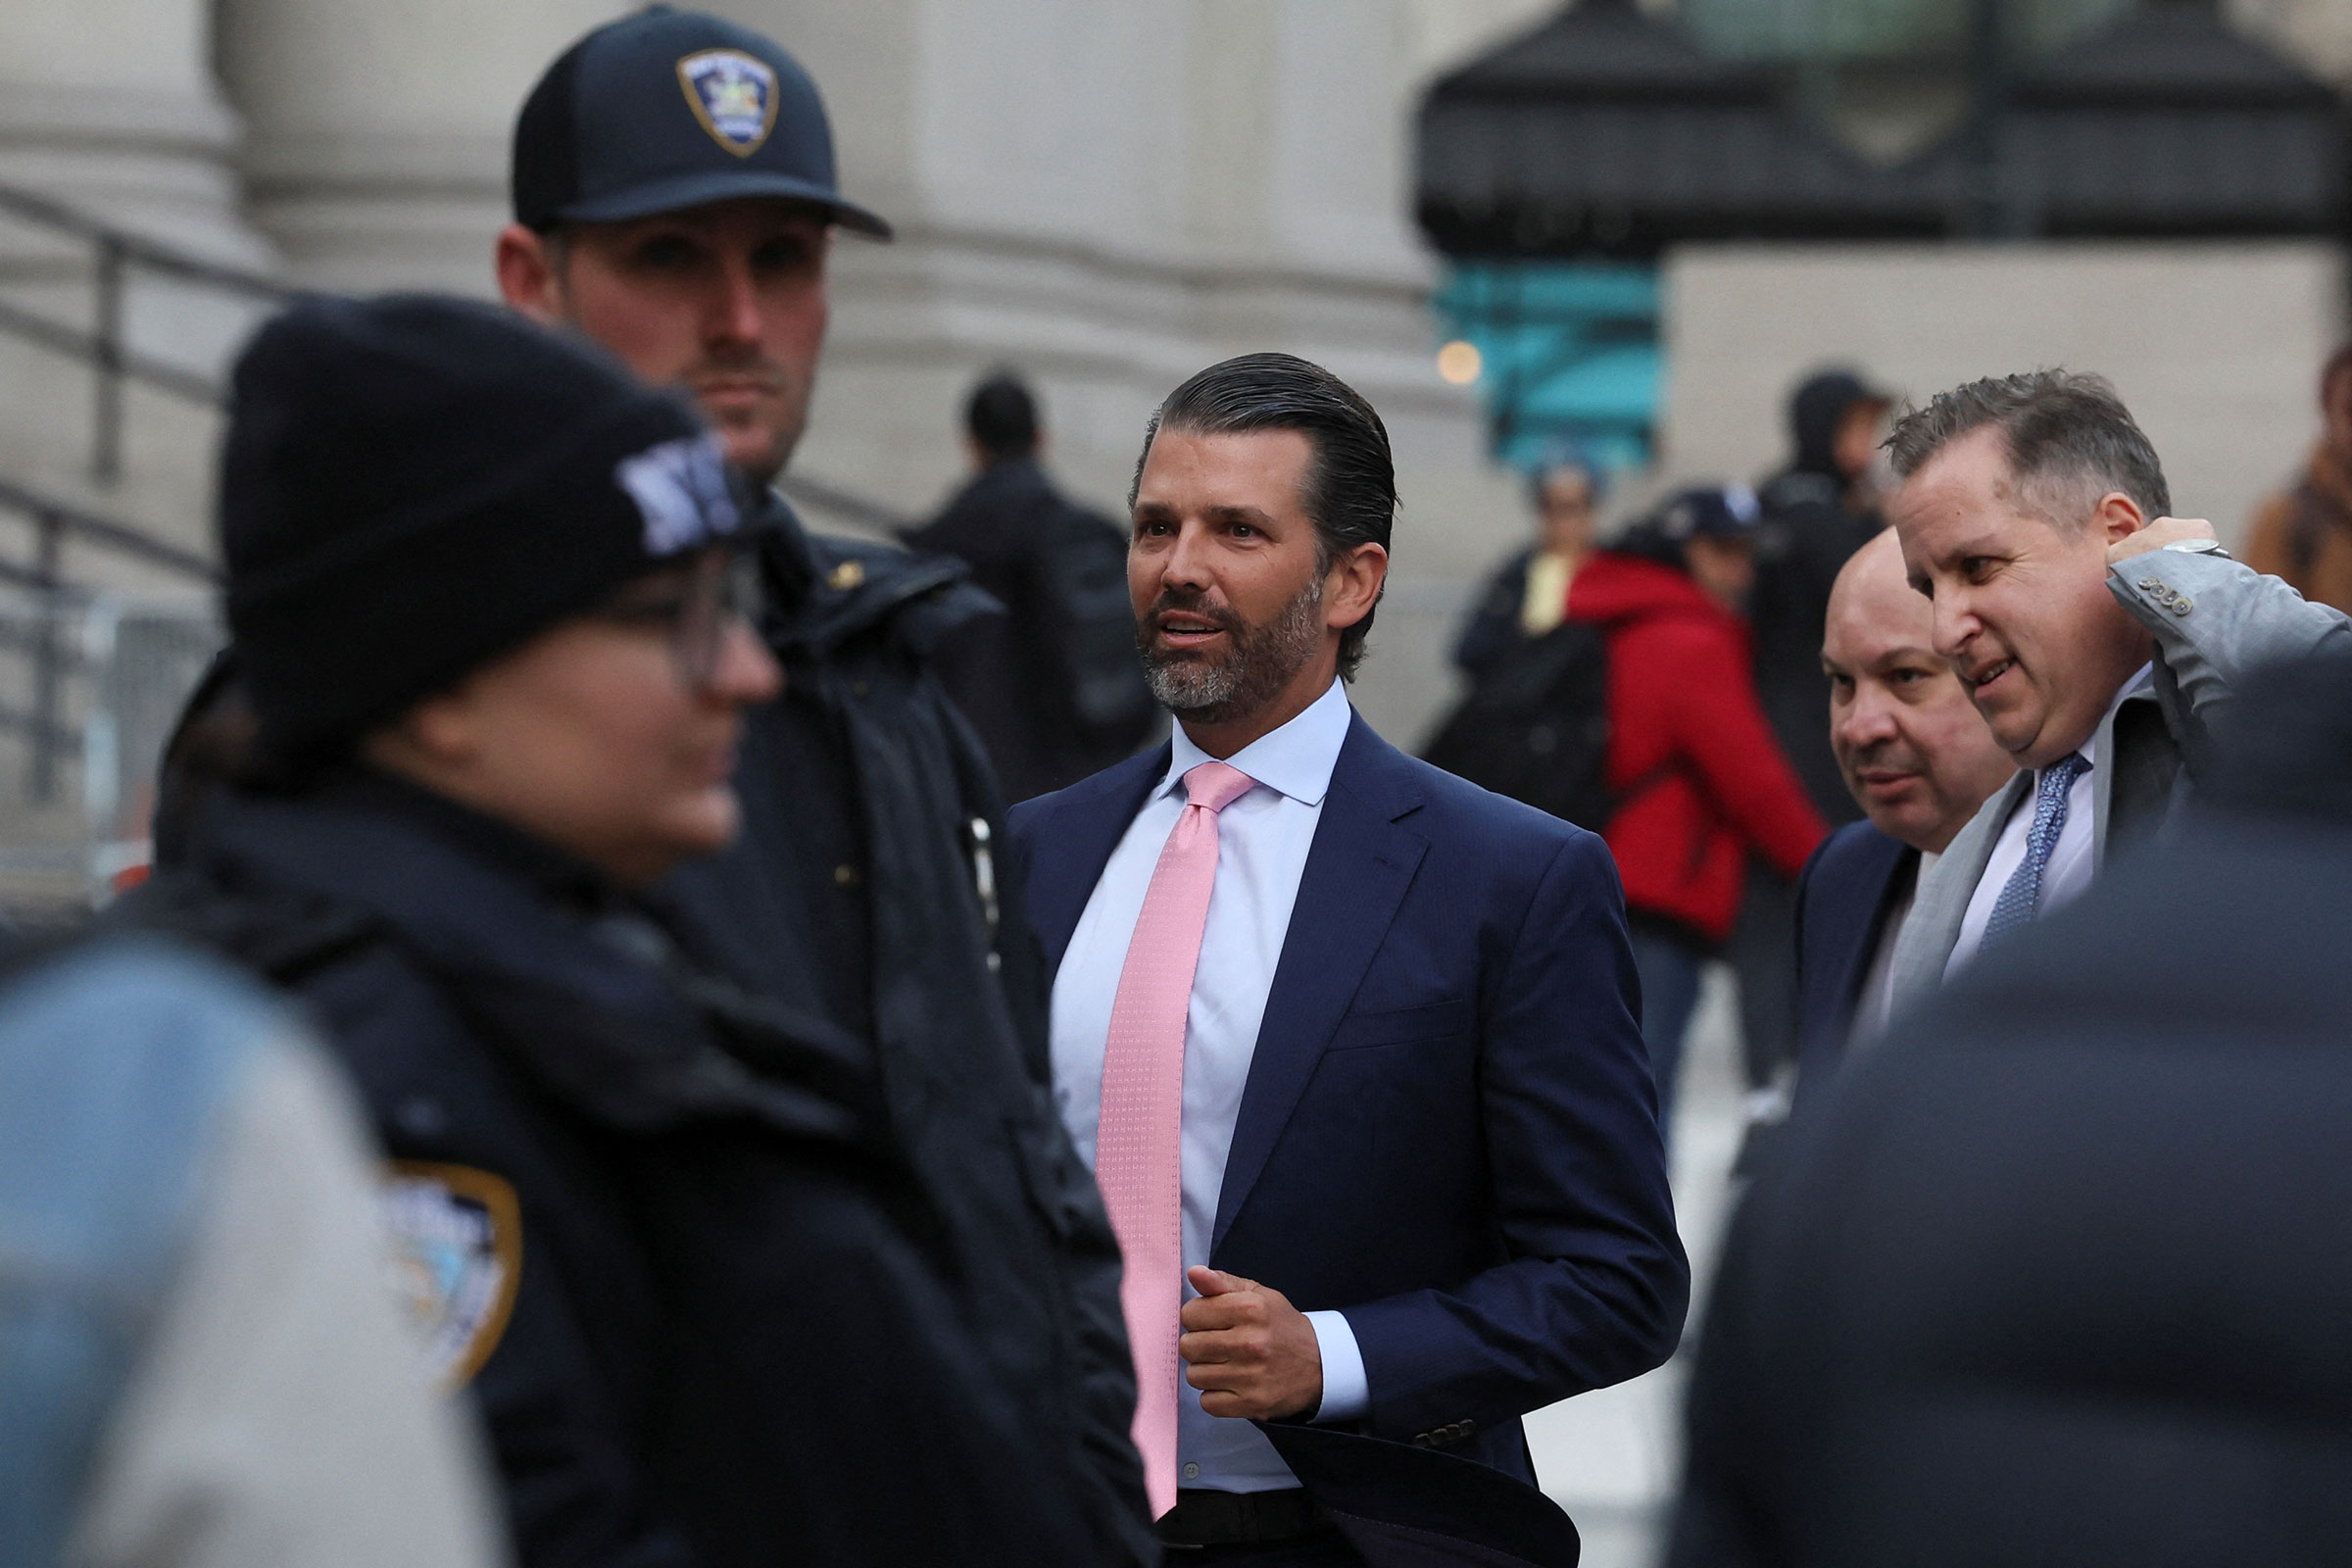 Former US President Donald Trump's son and co-defendant, Donald Trump Jr., arrives to attend the Trump Organization civil fraud trial, in New York State Supreme Court in the Manhattan borough of New York City, on November 1.